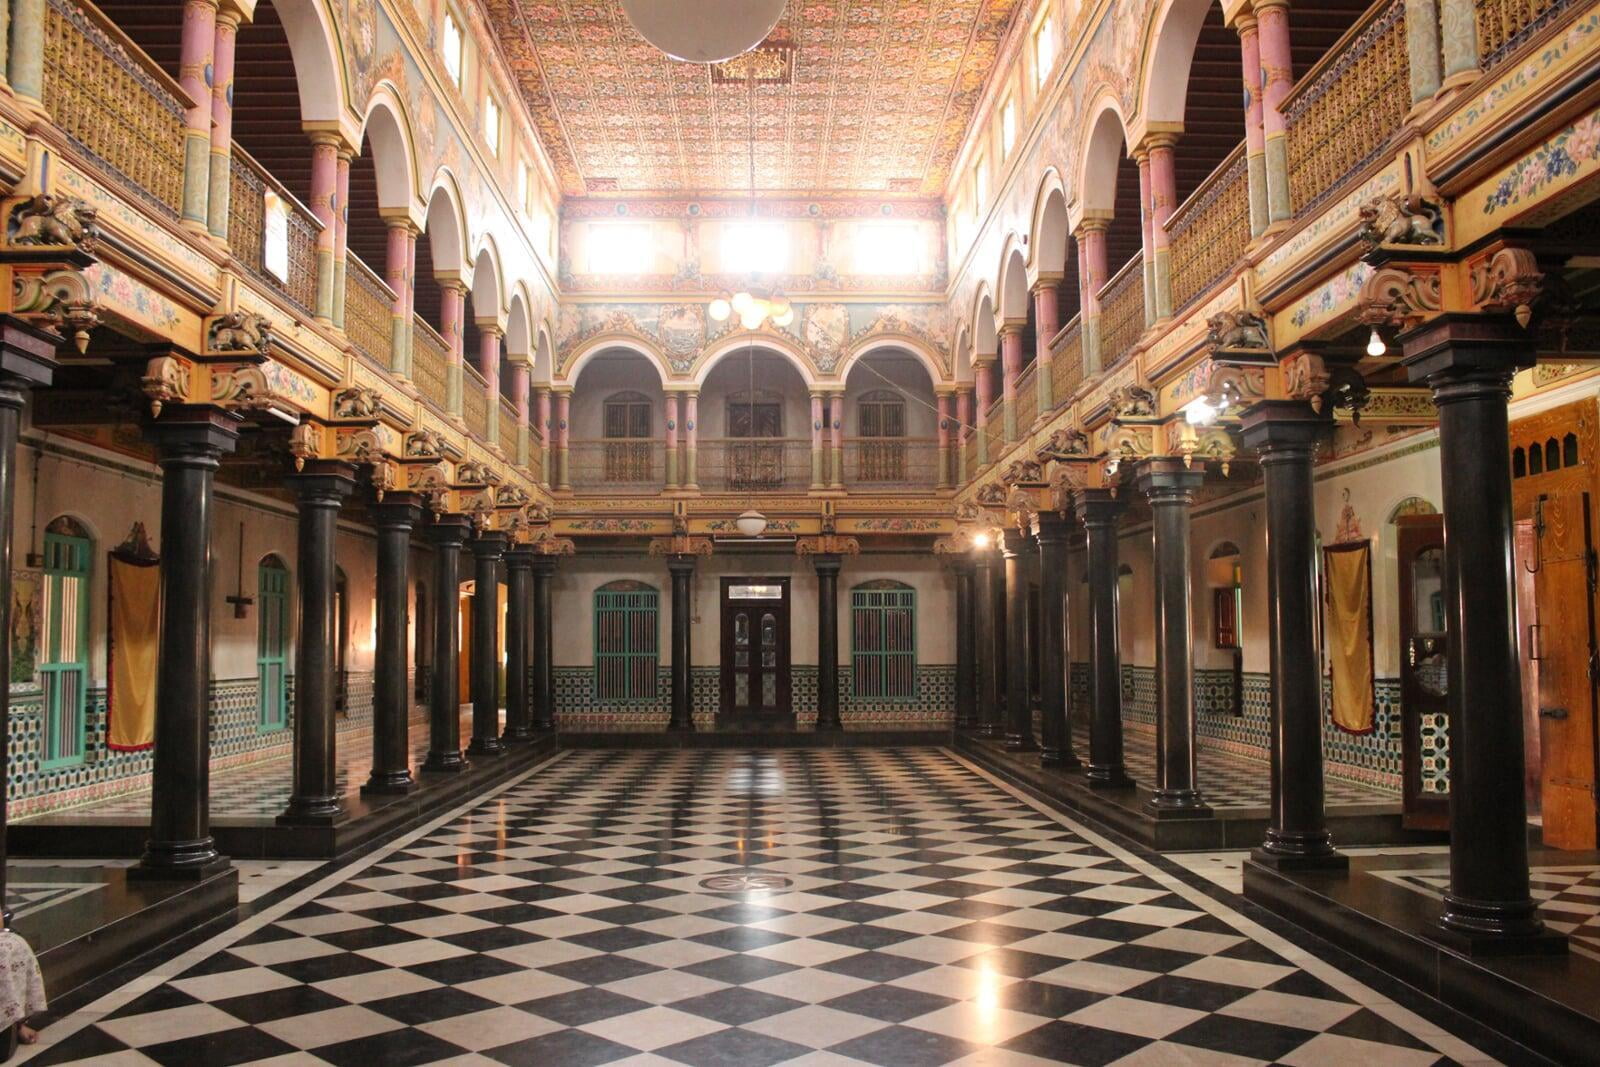 A View of the Grand hall of the "Periya Veedu" (Big House) in Athangudi Village. The photo shows a huge hall with a chequered floor of Italian black & white marble. The floor is flanked by marble pillars which stretch along a corridor. There is an upper floor above the corridor, overlooking into the grand hall. The upper floor has a walkway flanked by colourful pillars and a balustrade. The ceiling of the hall is filled with intricate and colourful geometric designs. Afternoon sunlight streams in through several small windows which are positioned just below the ceiling. 